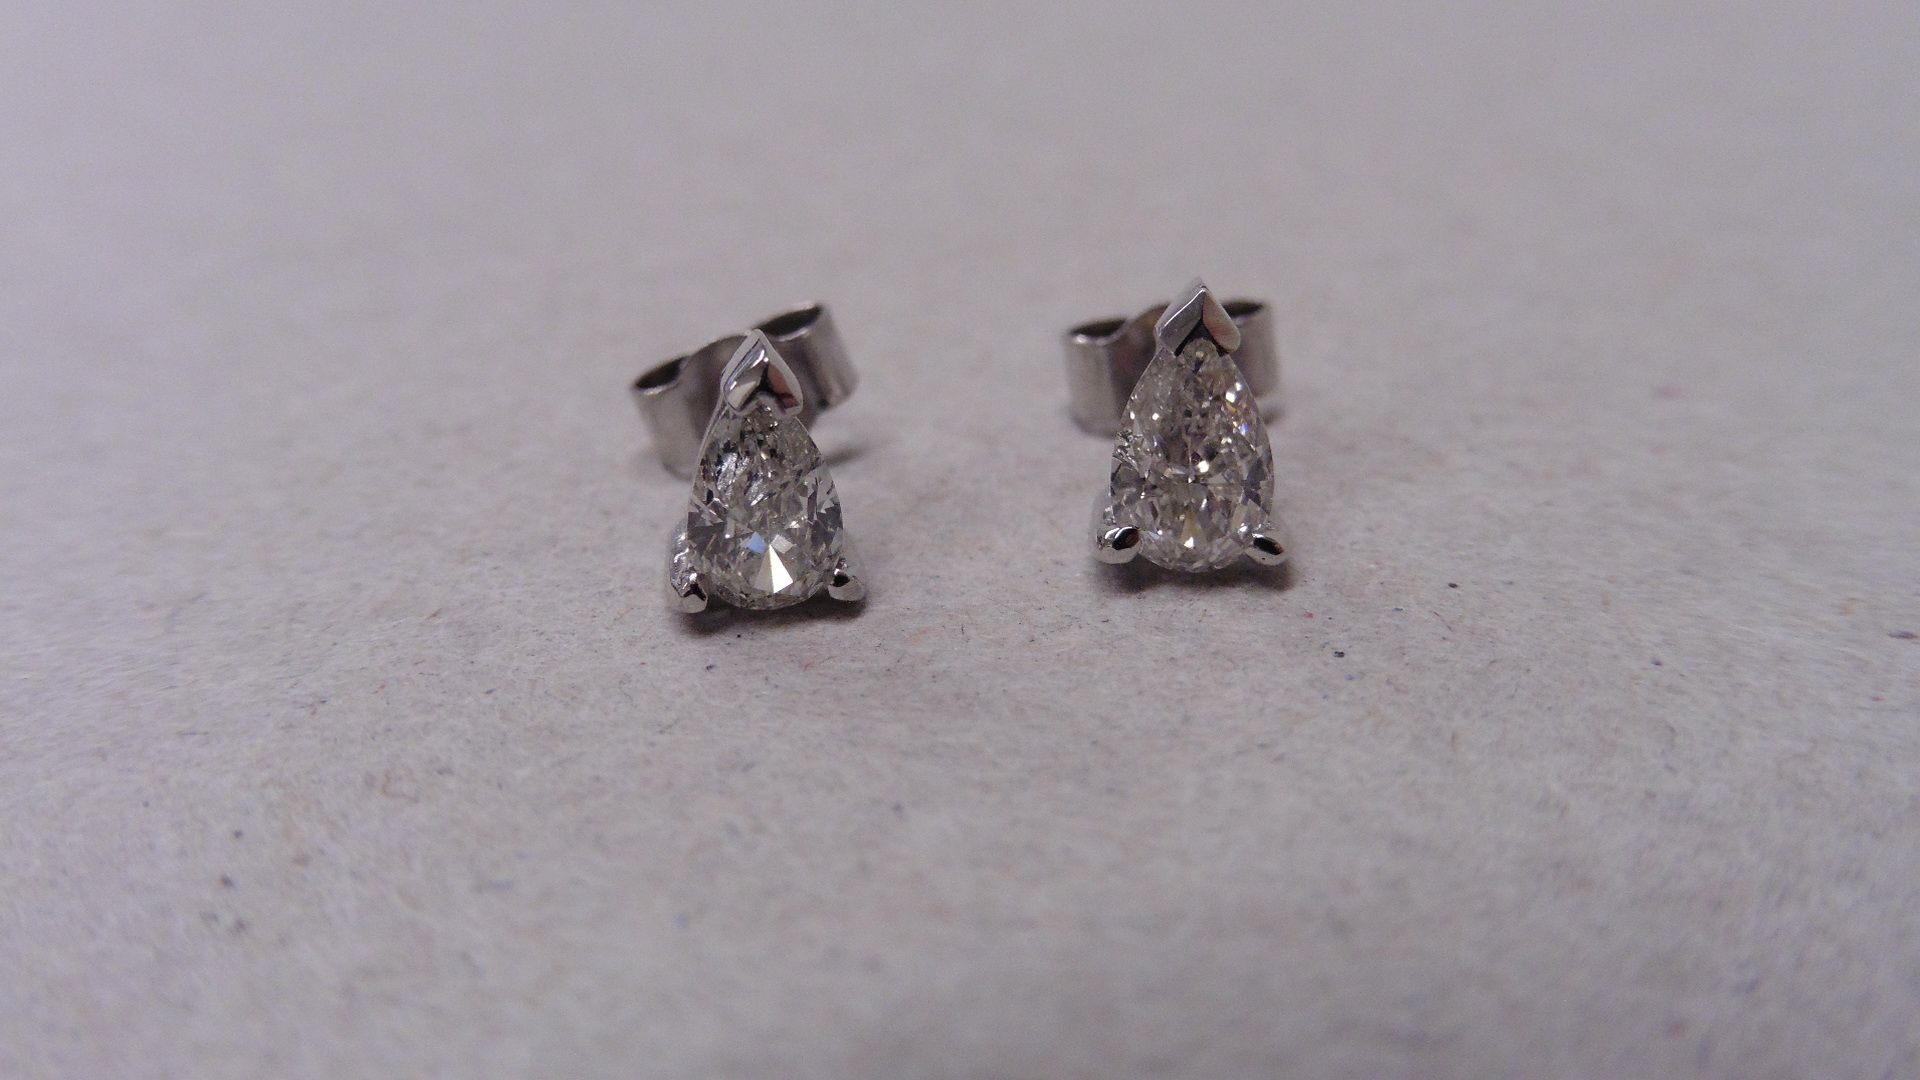 0.70ct diamond earrings with pear diamonds. H/Icolour and si2 clarity. Set in 18ct white gold with